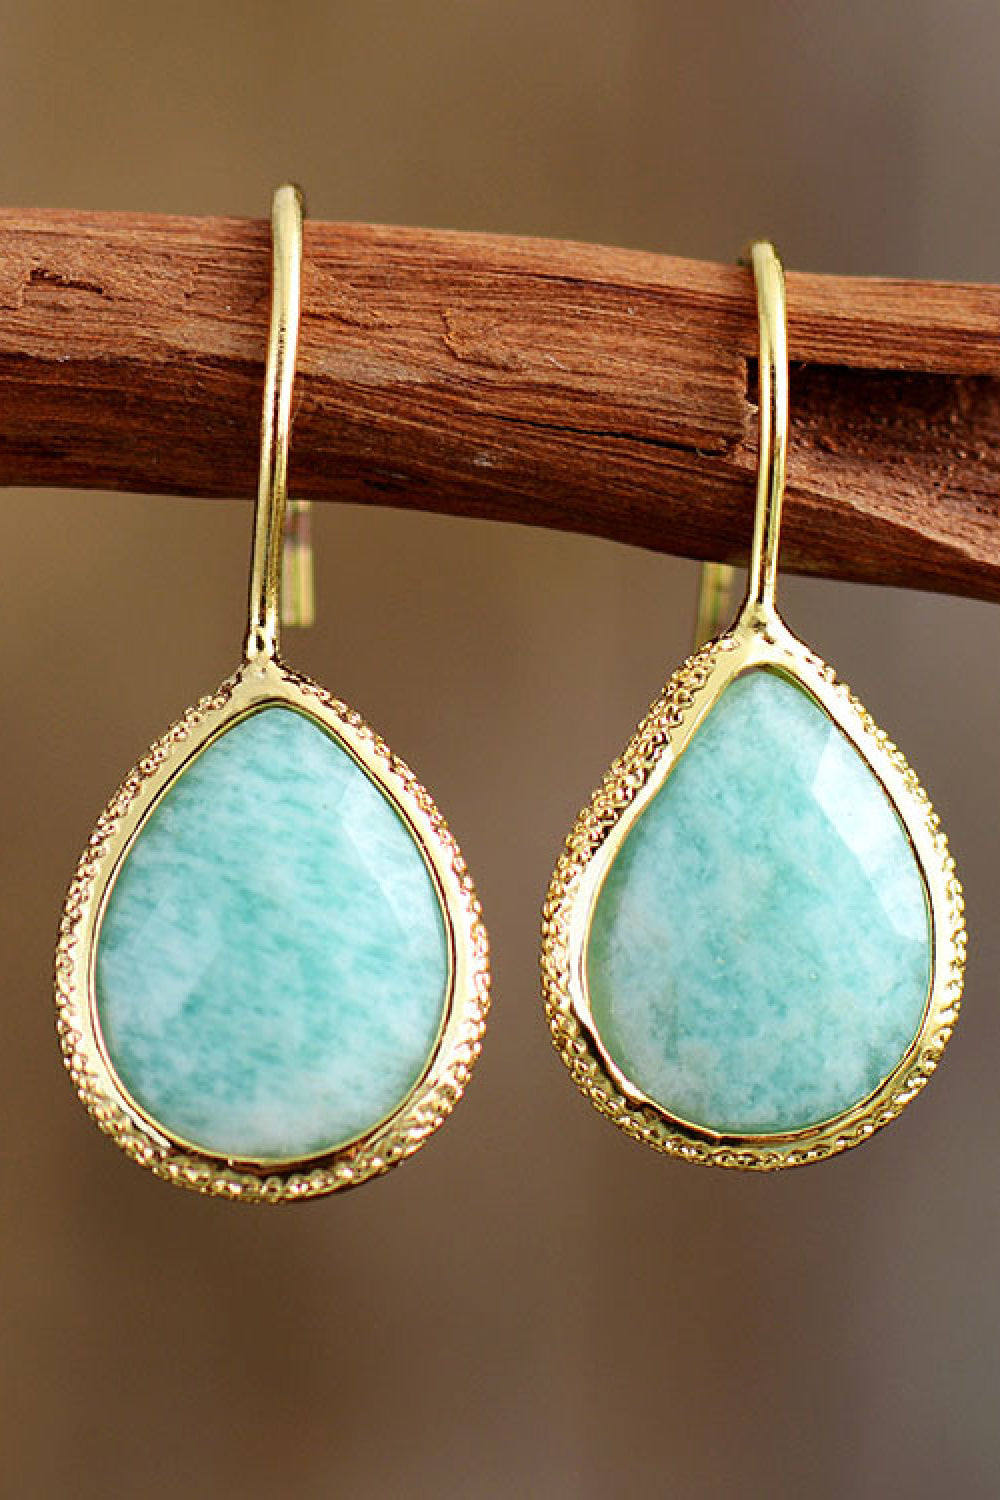 Handmade natural stone teardrop earrings-Wild Willows Boutique NY – Massapequa, New York. Affordable and fashionable clothing for women of all ages. Bottoms, tops, dresses, intimates, outerwear, sweaters, shoes, accessories, jewelry, activewear and more//wild Willow Boutique